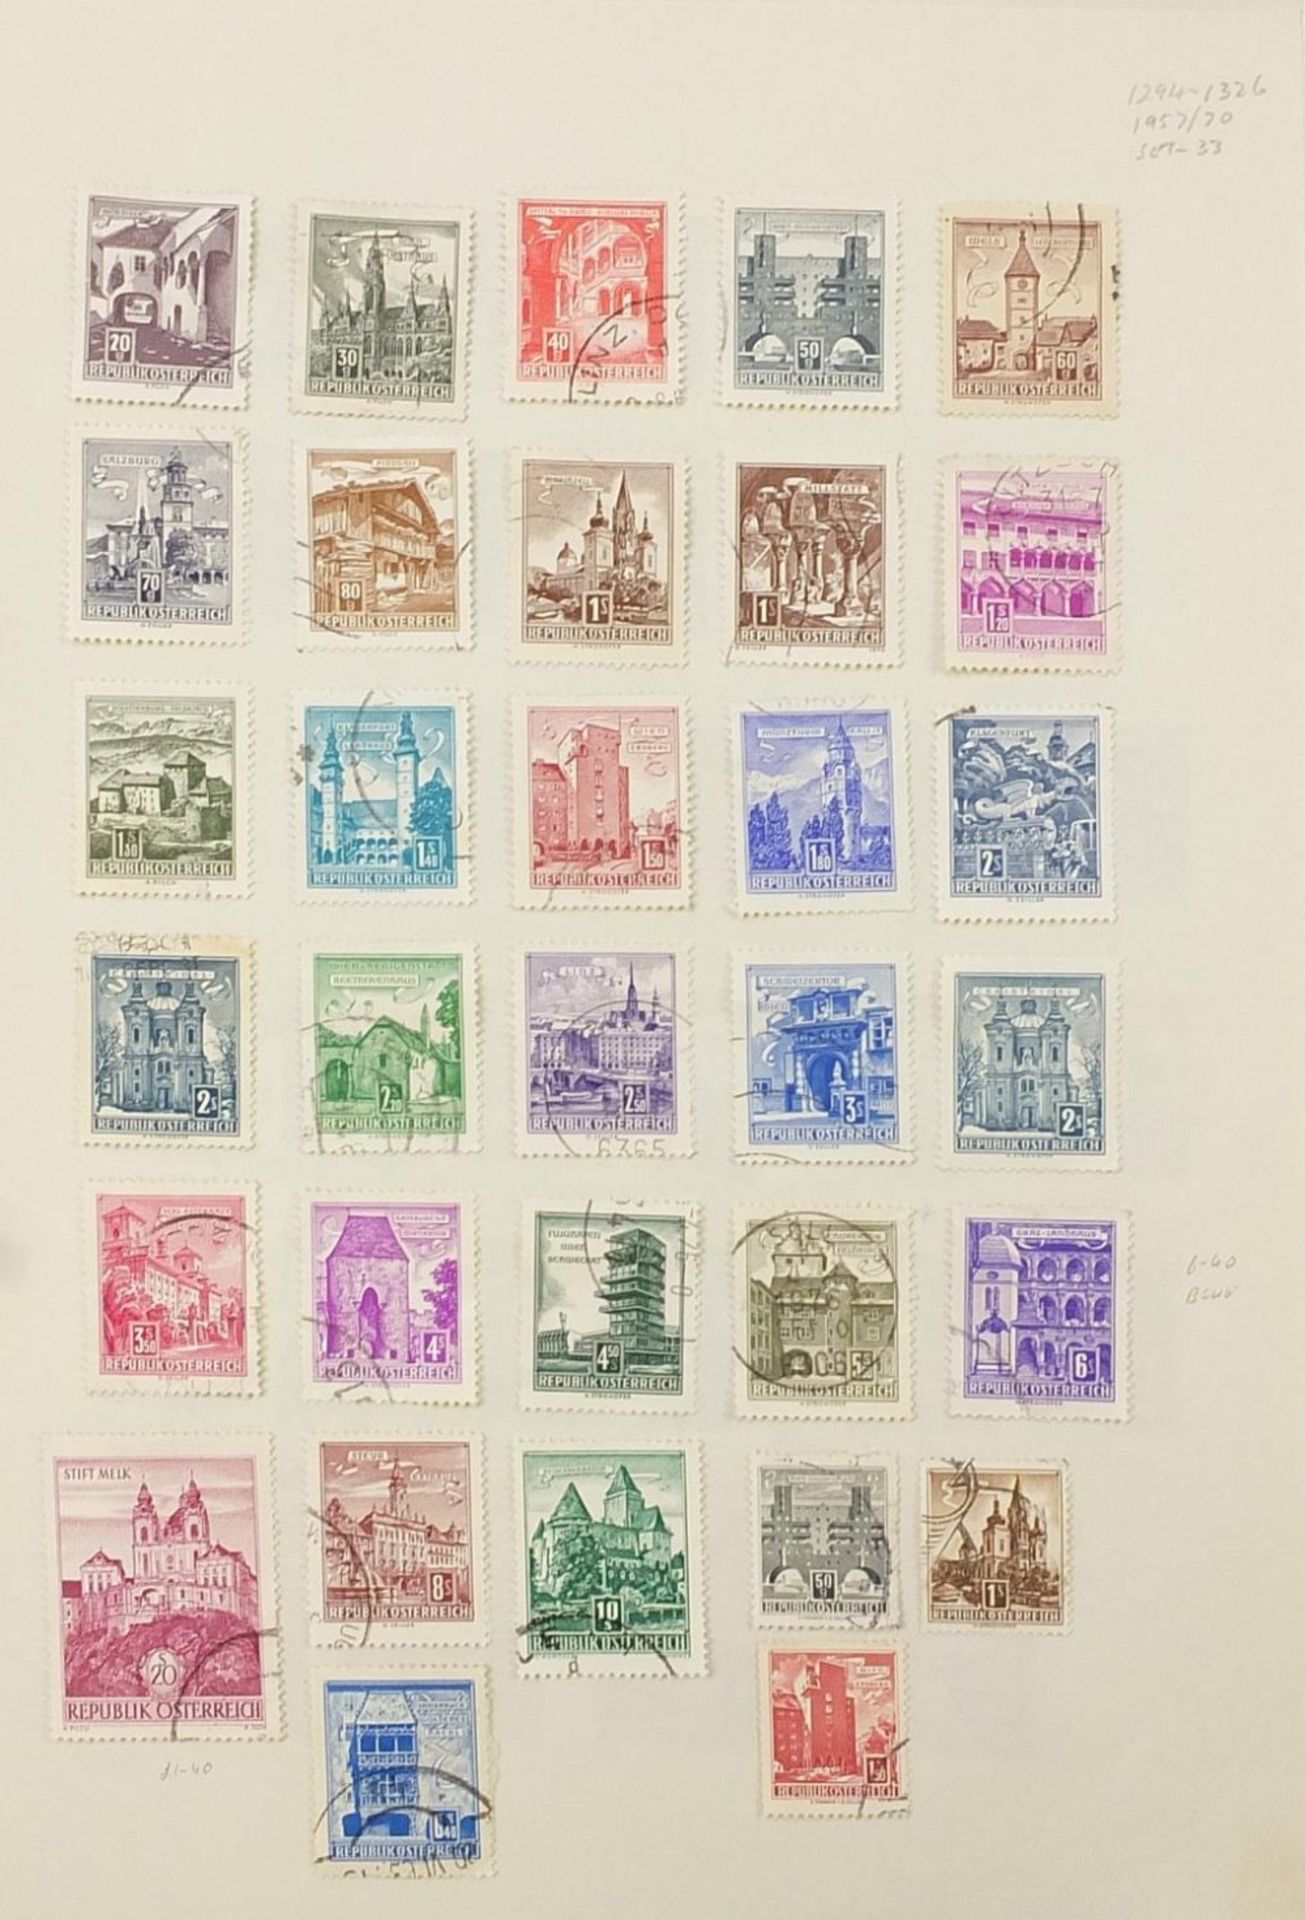 Extensive collection of antique and later world stamps arranged in albums including Brazil, - Image 48 of 52